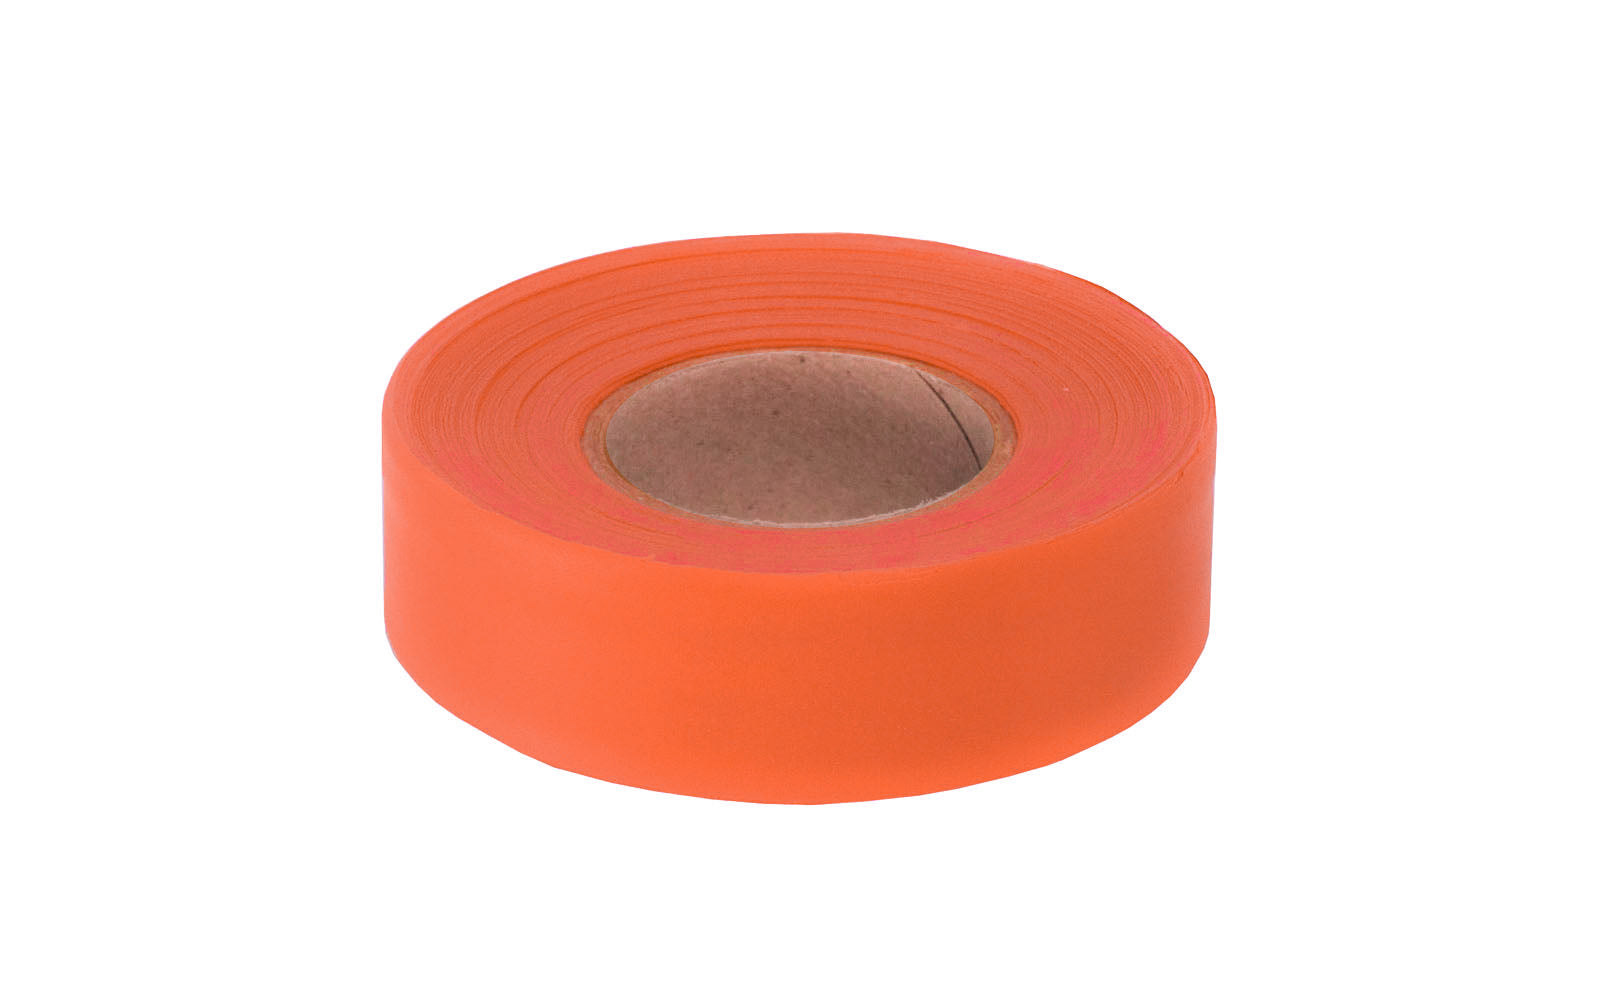 This Swanson Orange Glo Flagging Tape 1" x 150' is durable plastic tape that remains pliant in cold weather. Easy to tear & tie off. Tape is ideal for surveying projects, marking trails, & similar tasks, etc. 038987643316. Model RFTGLO150